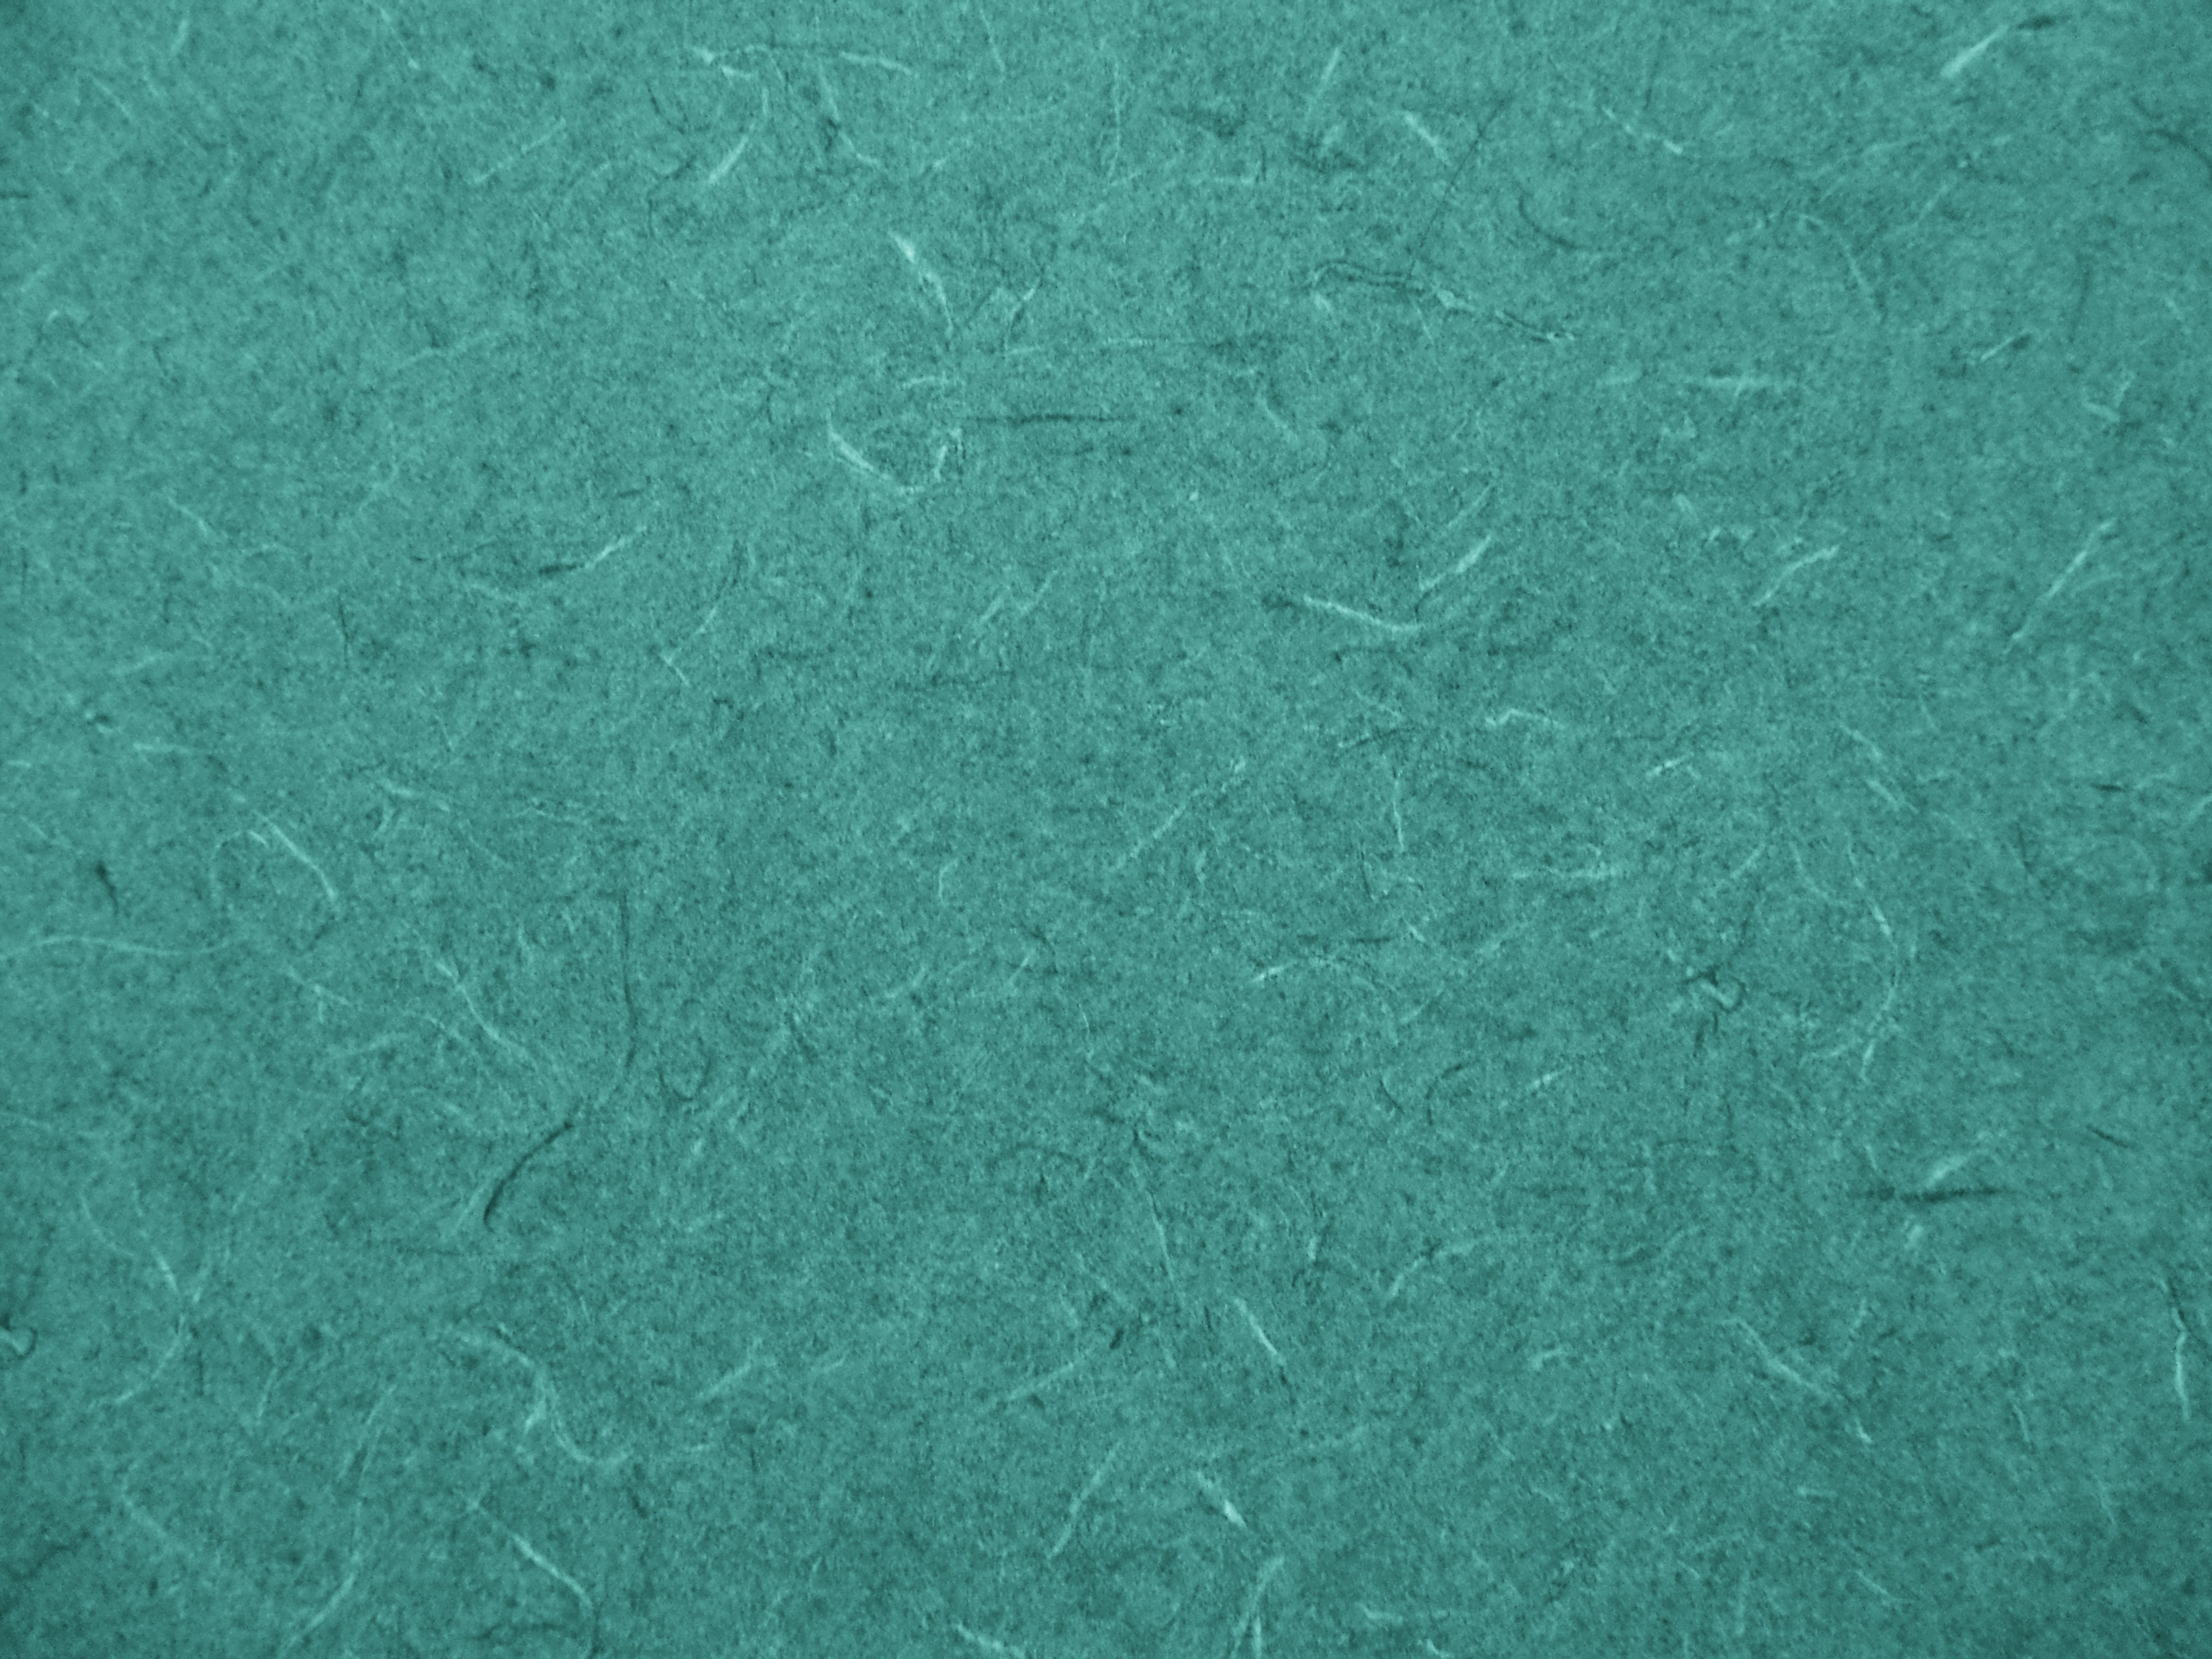 Turquoise Abstract Pattern Laminate Countertop Texture Picture